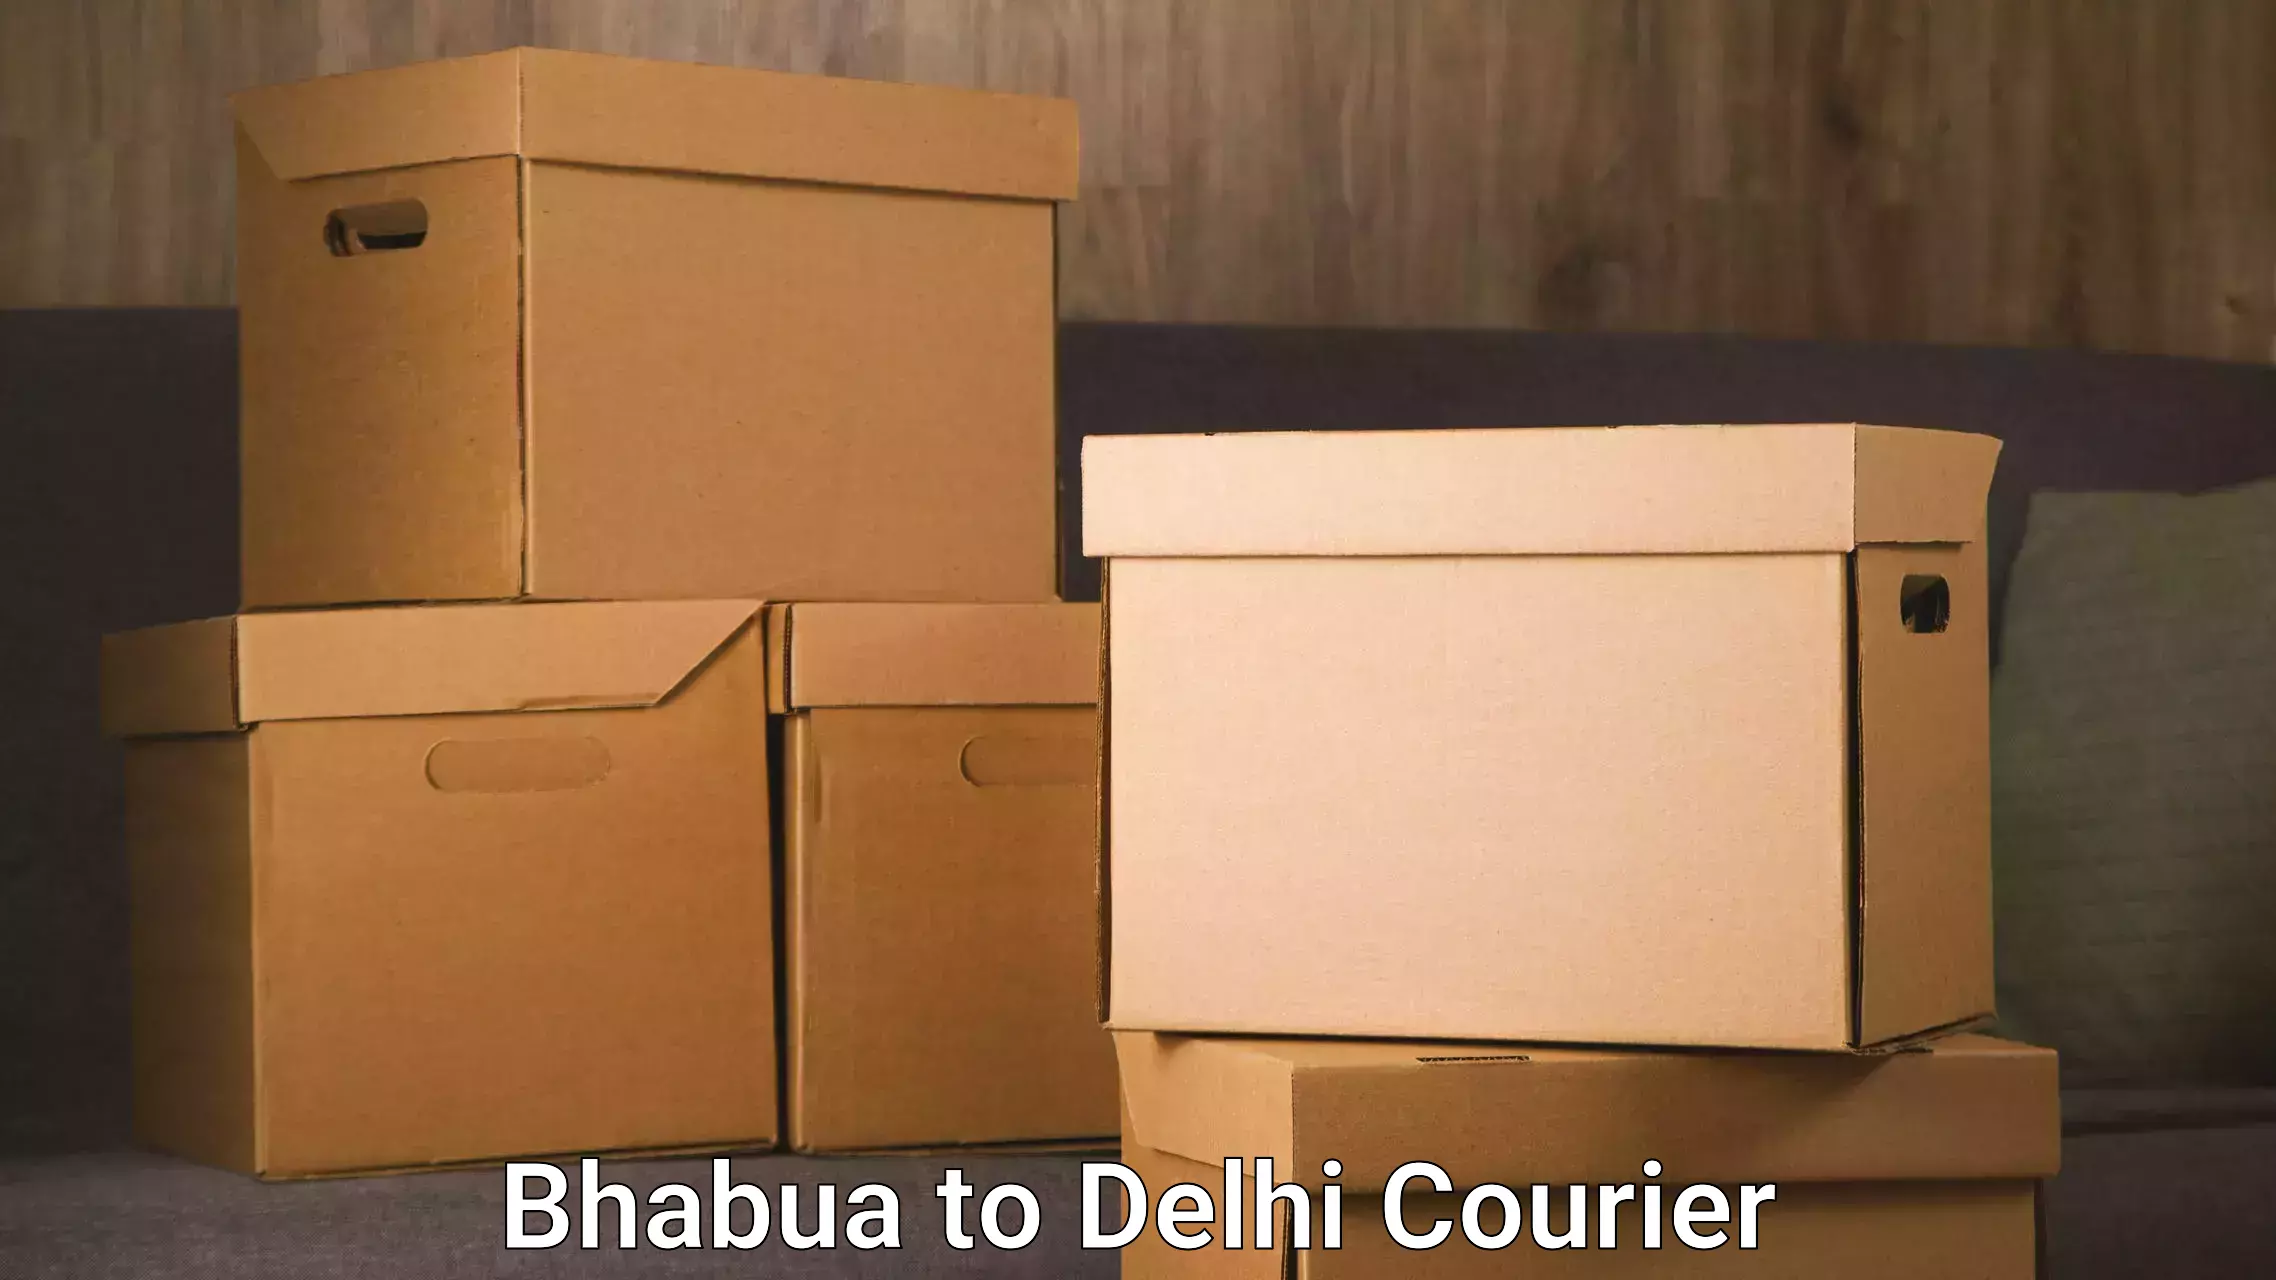 Trusted relocation experts Bhabua to Lodhi Road